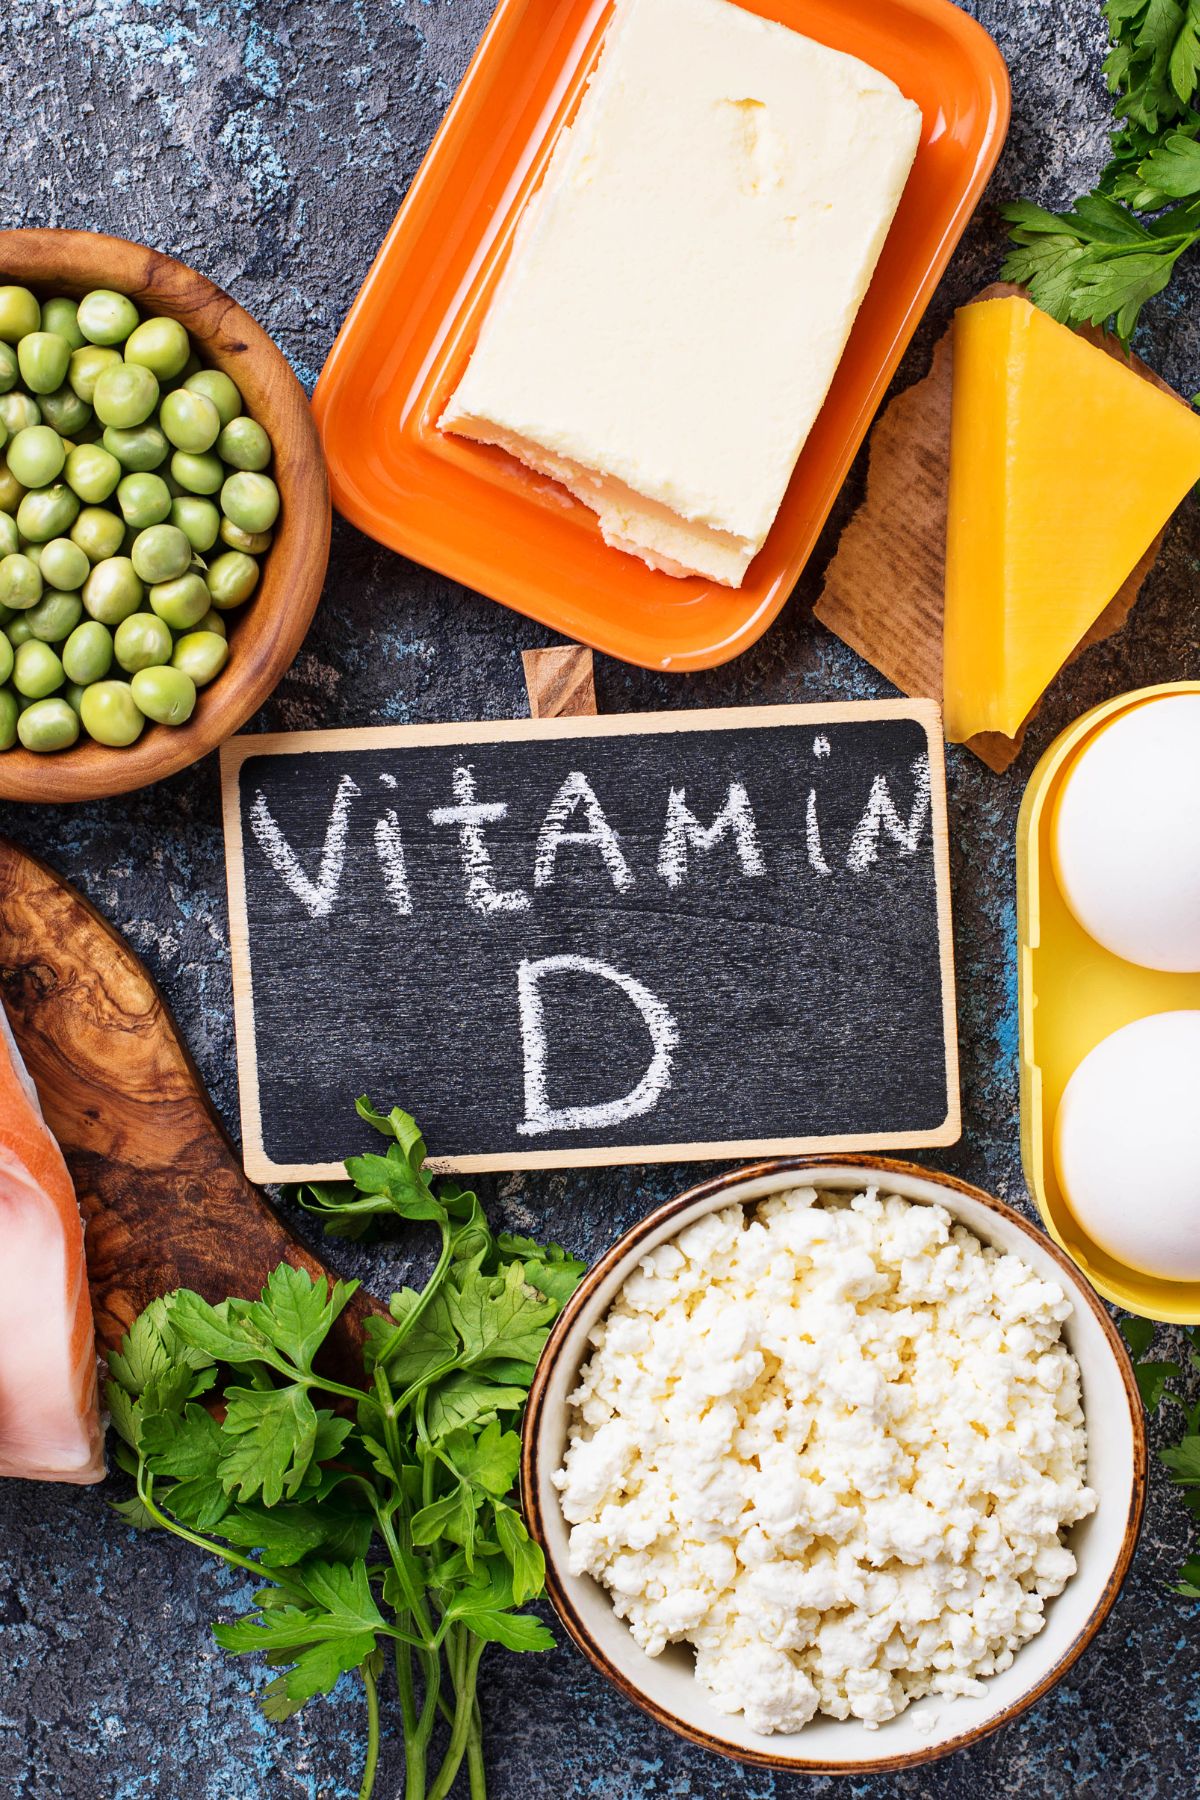 a variety of foods high in vitamin d surrounding a chalkboard sign of "vitamin d".